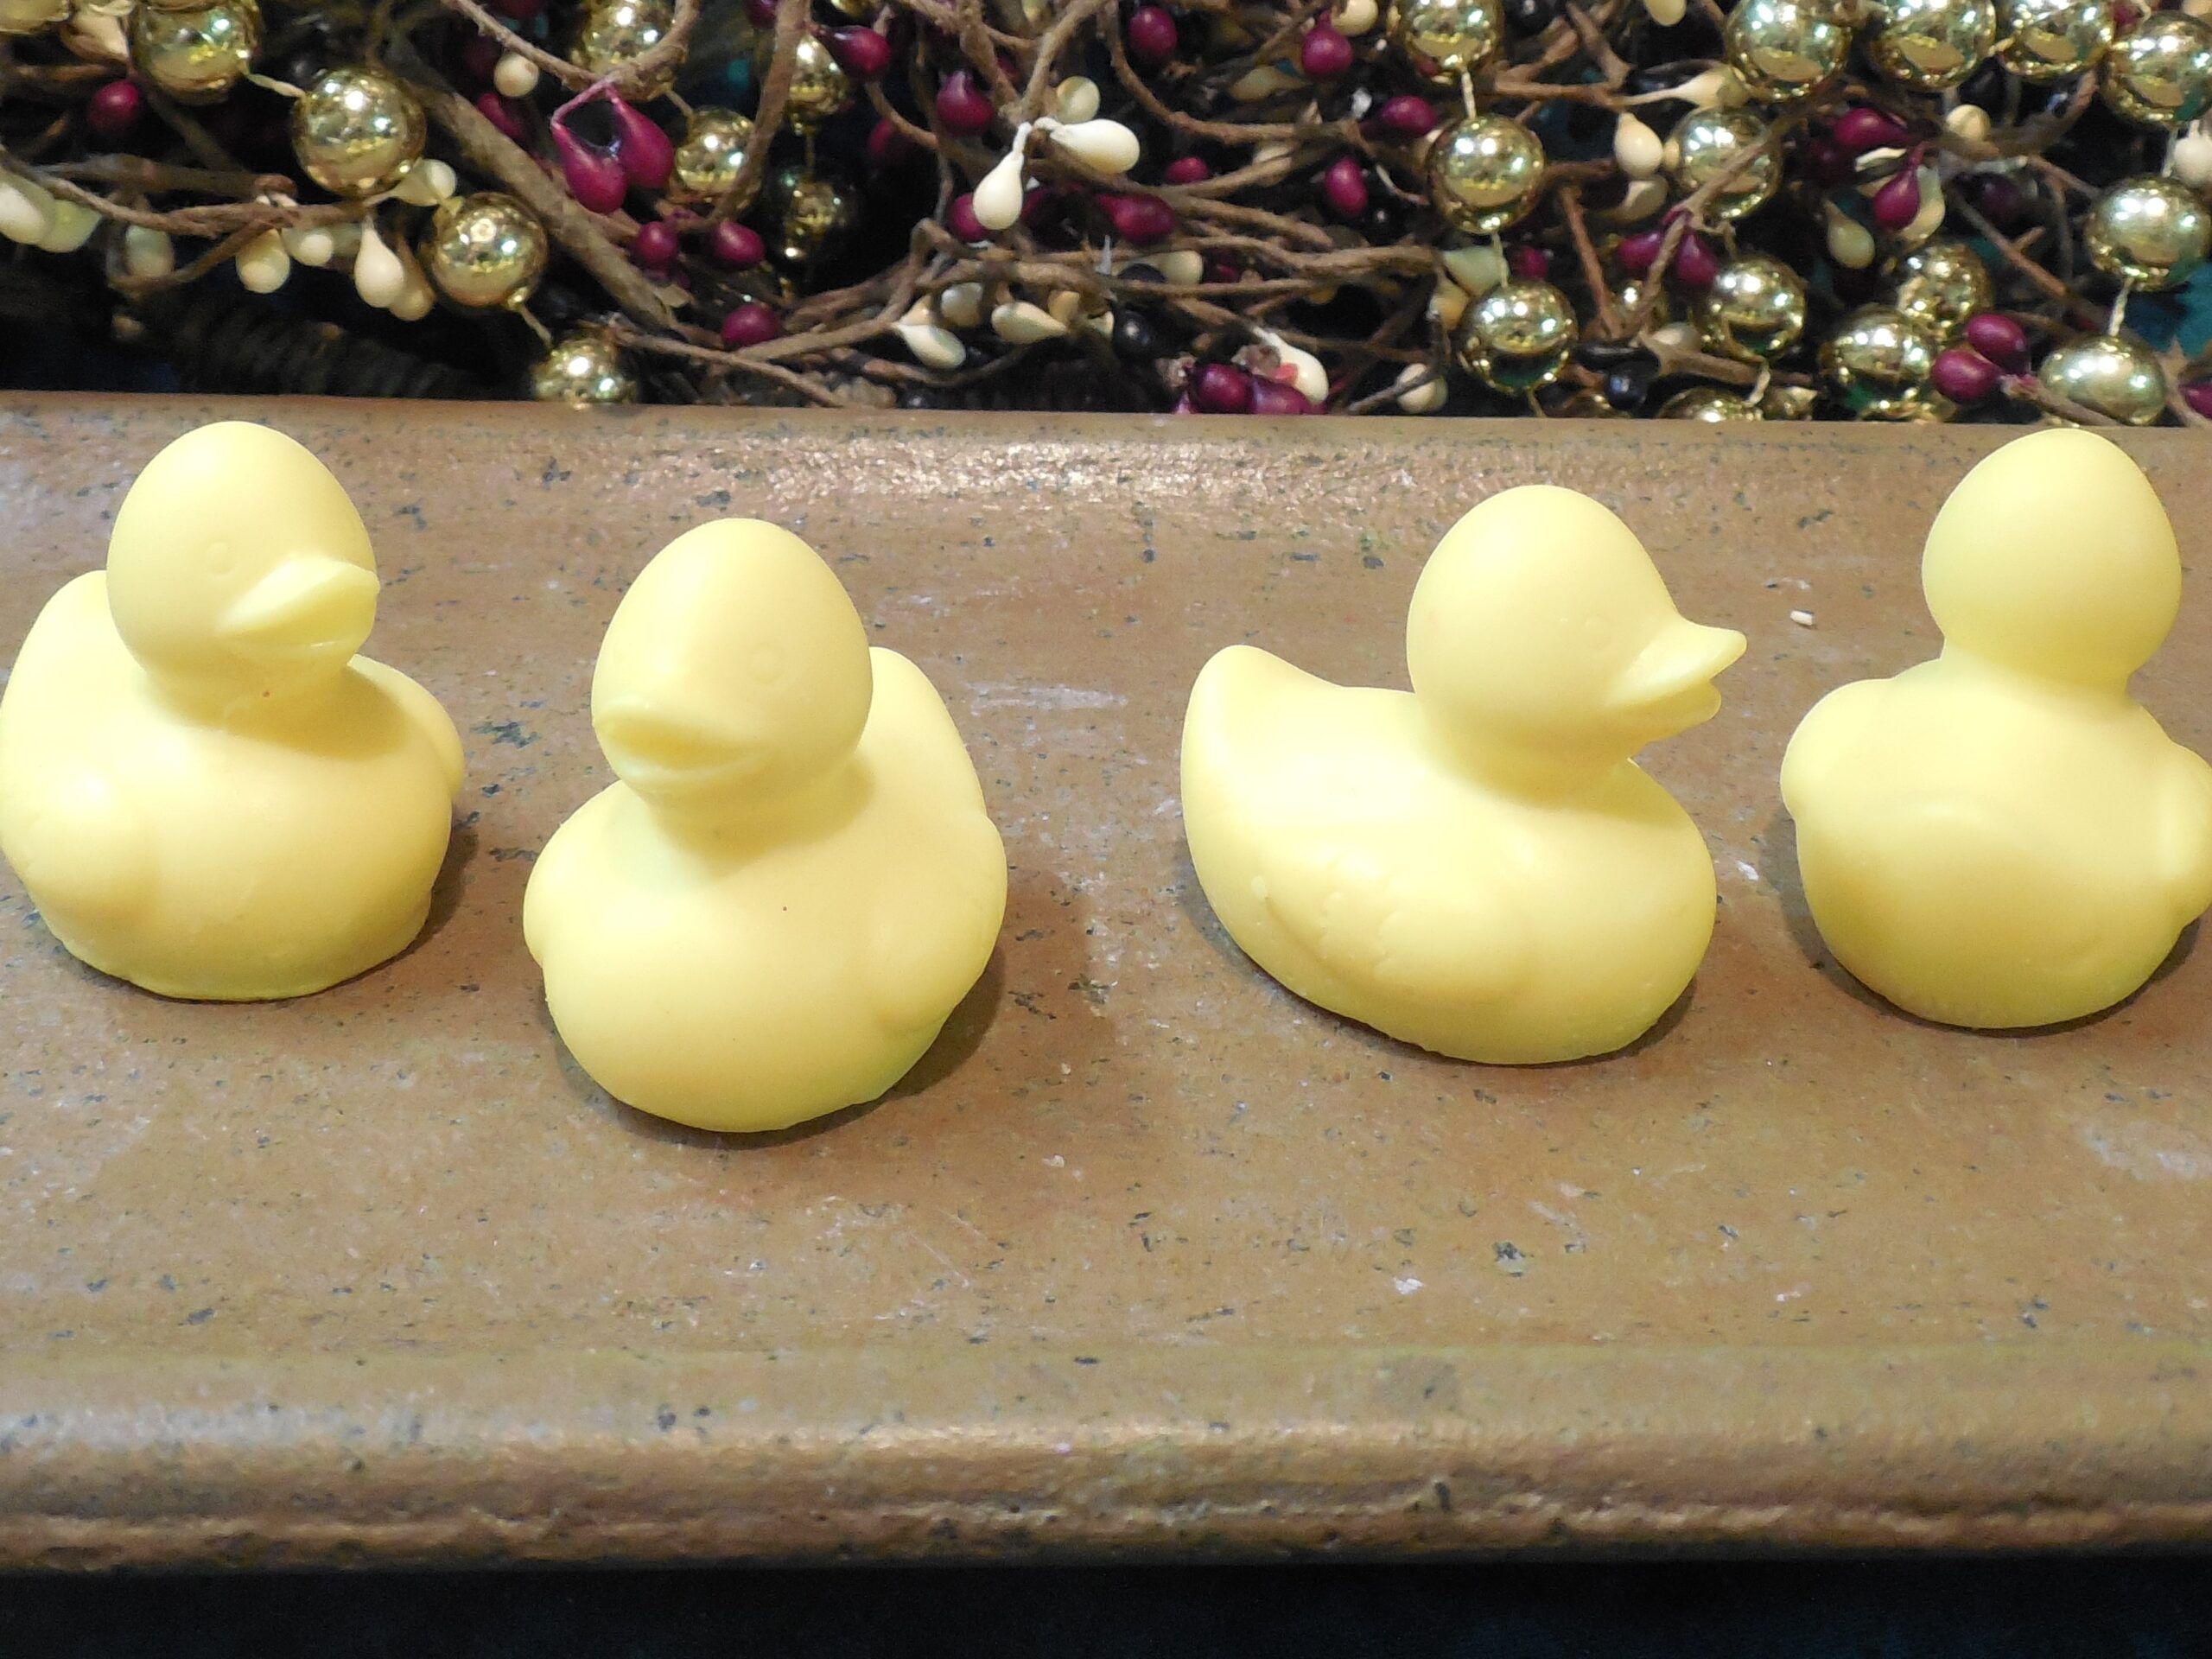 https://www.vanyulay.com/wp-content/uploads/2017/05/Rubber-Duckie-Mold-5344-2-scaled.jpg